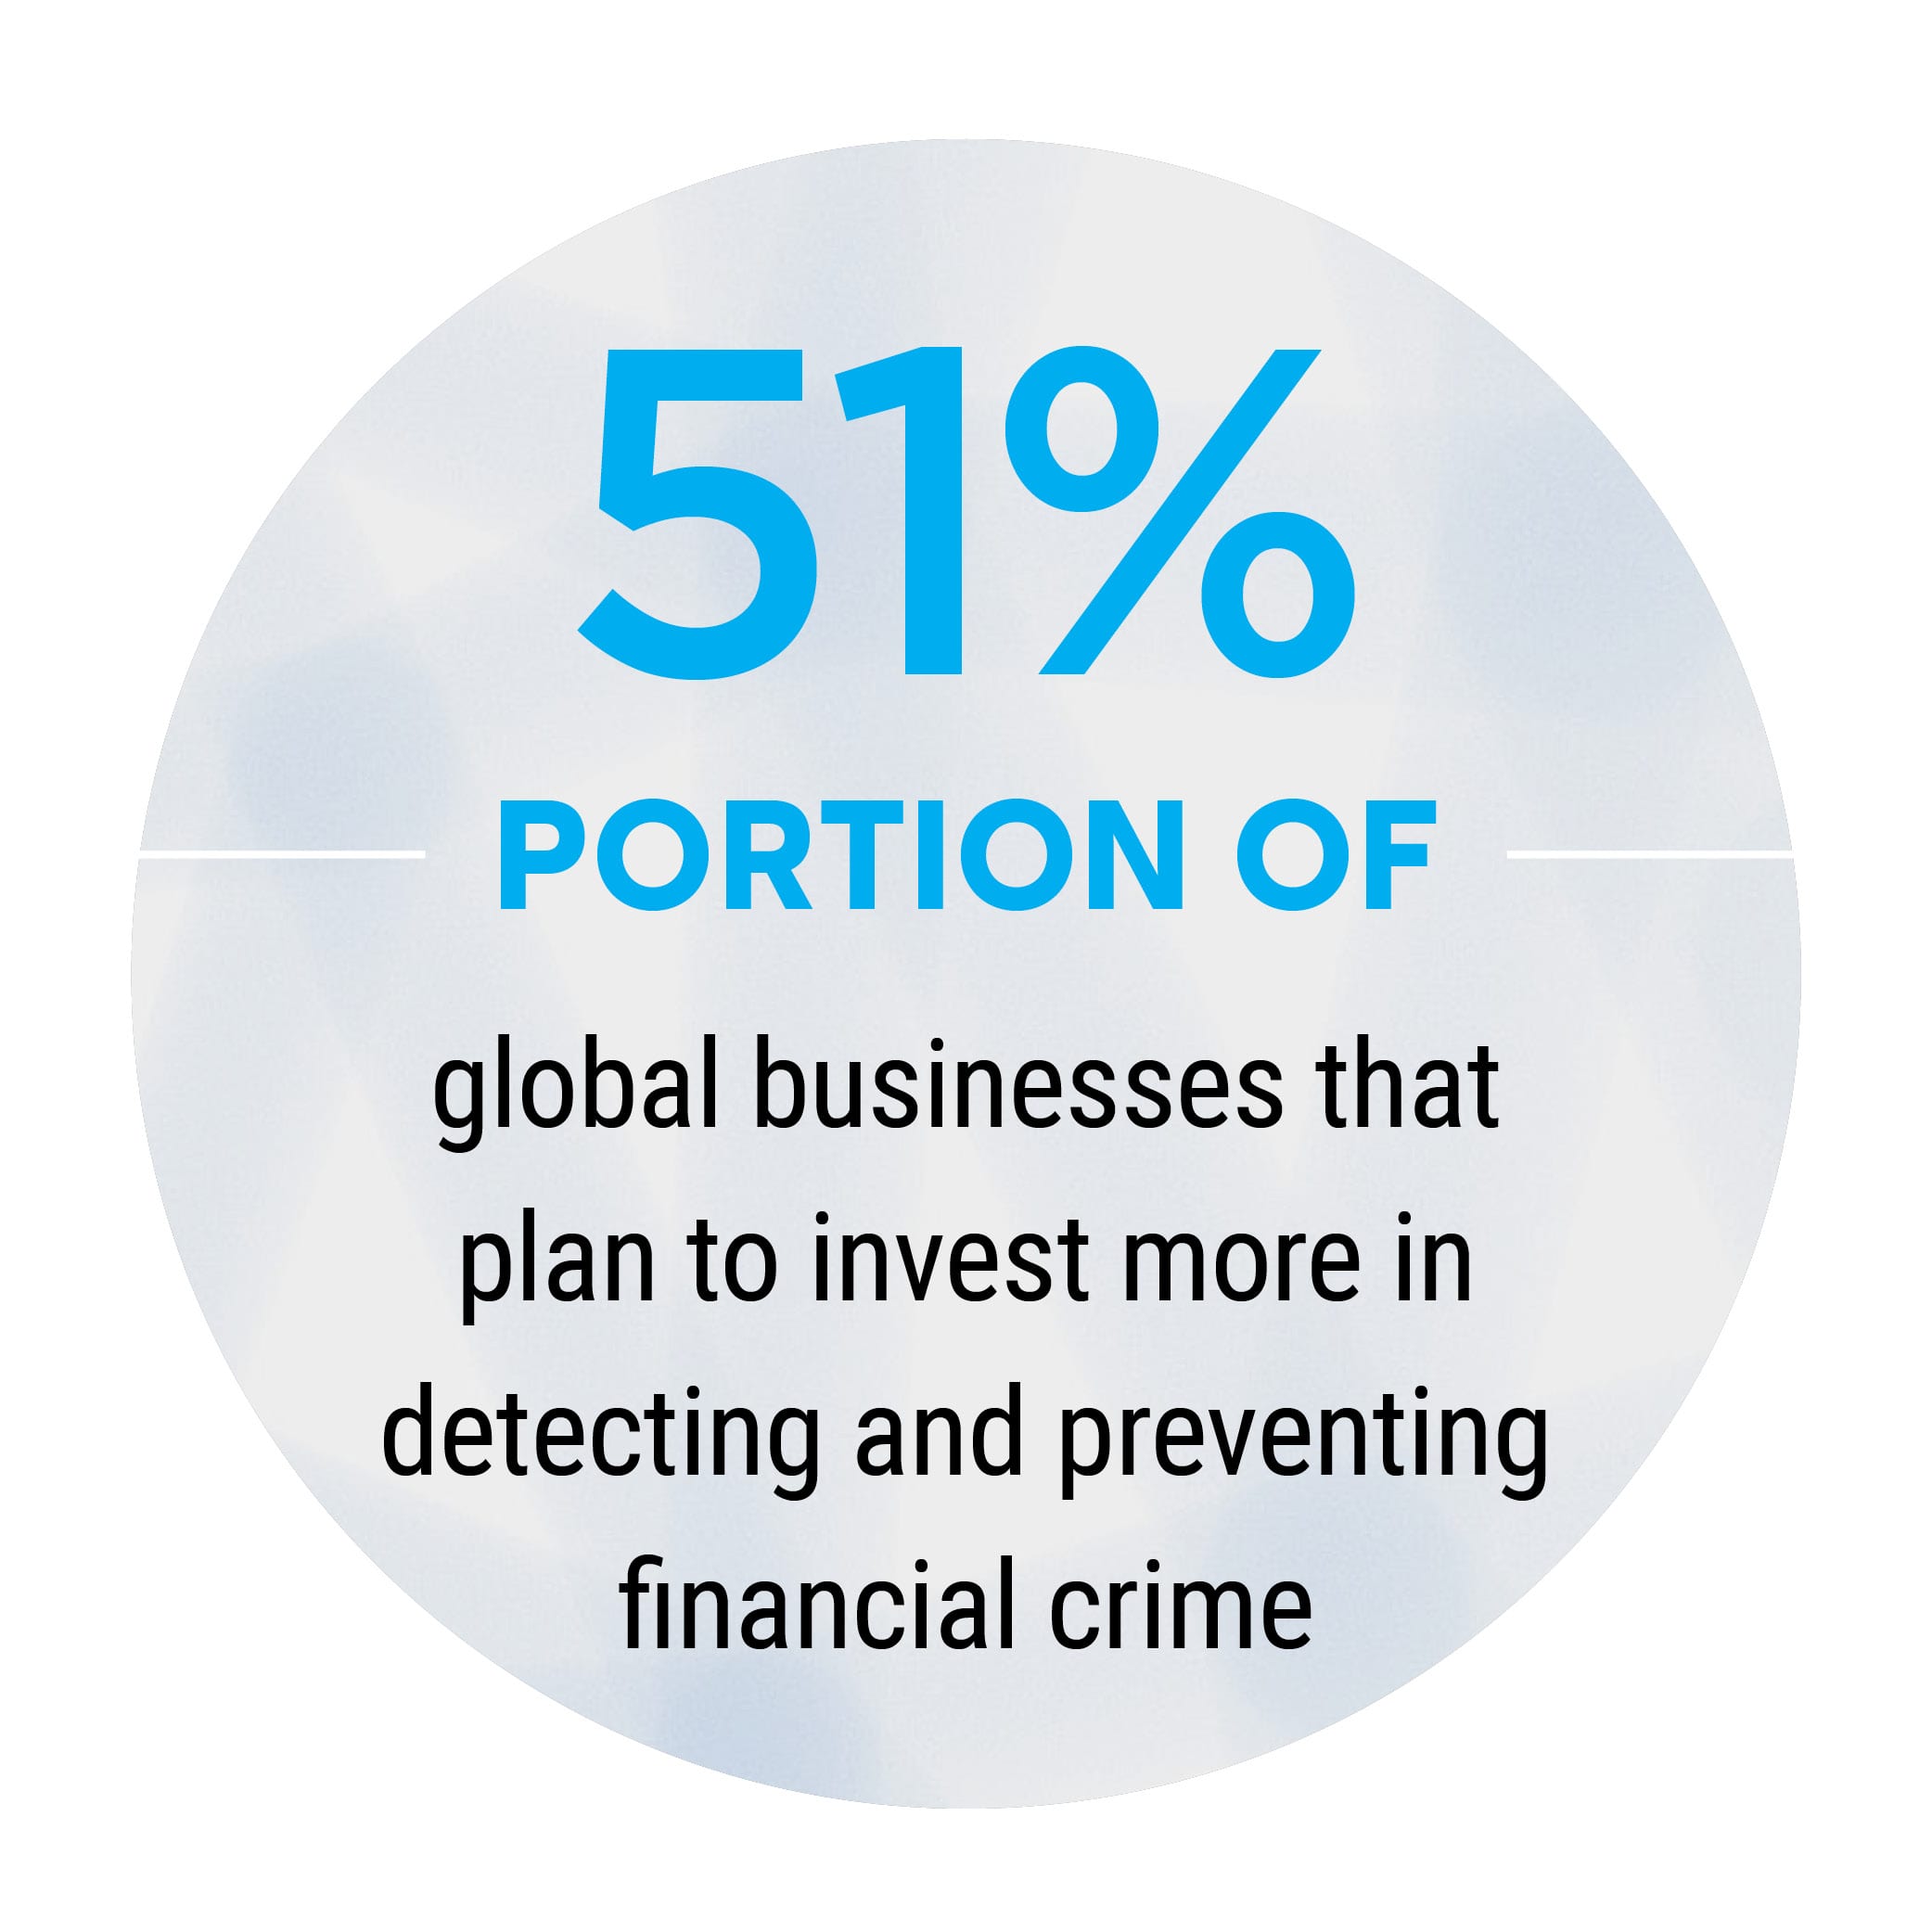 51%: Portion of global business that plan to invest more in detecting and preventing financial crime